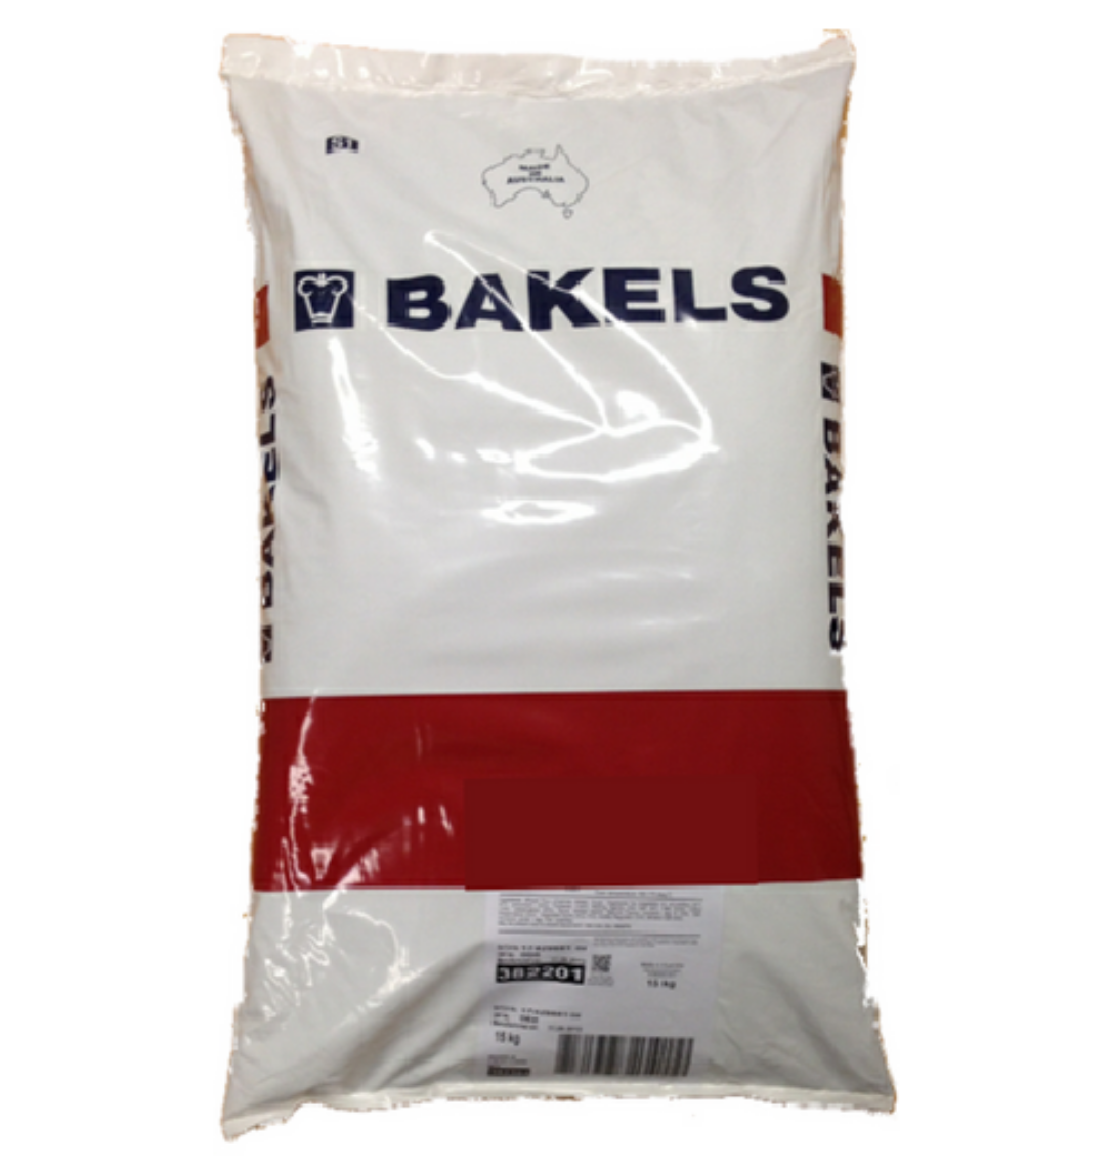 Picture of 10KG BAKELS MACARON MIX 317012 (s/ord)  (H)